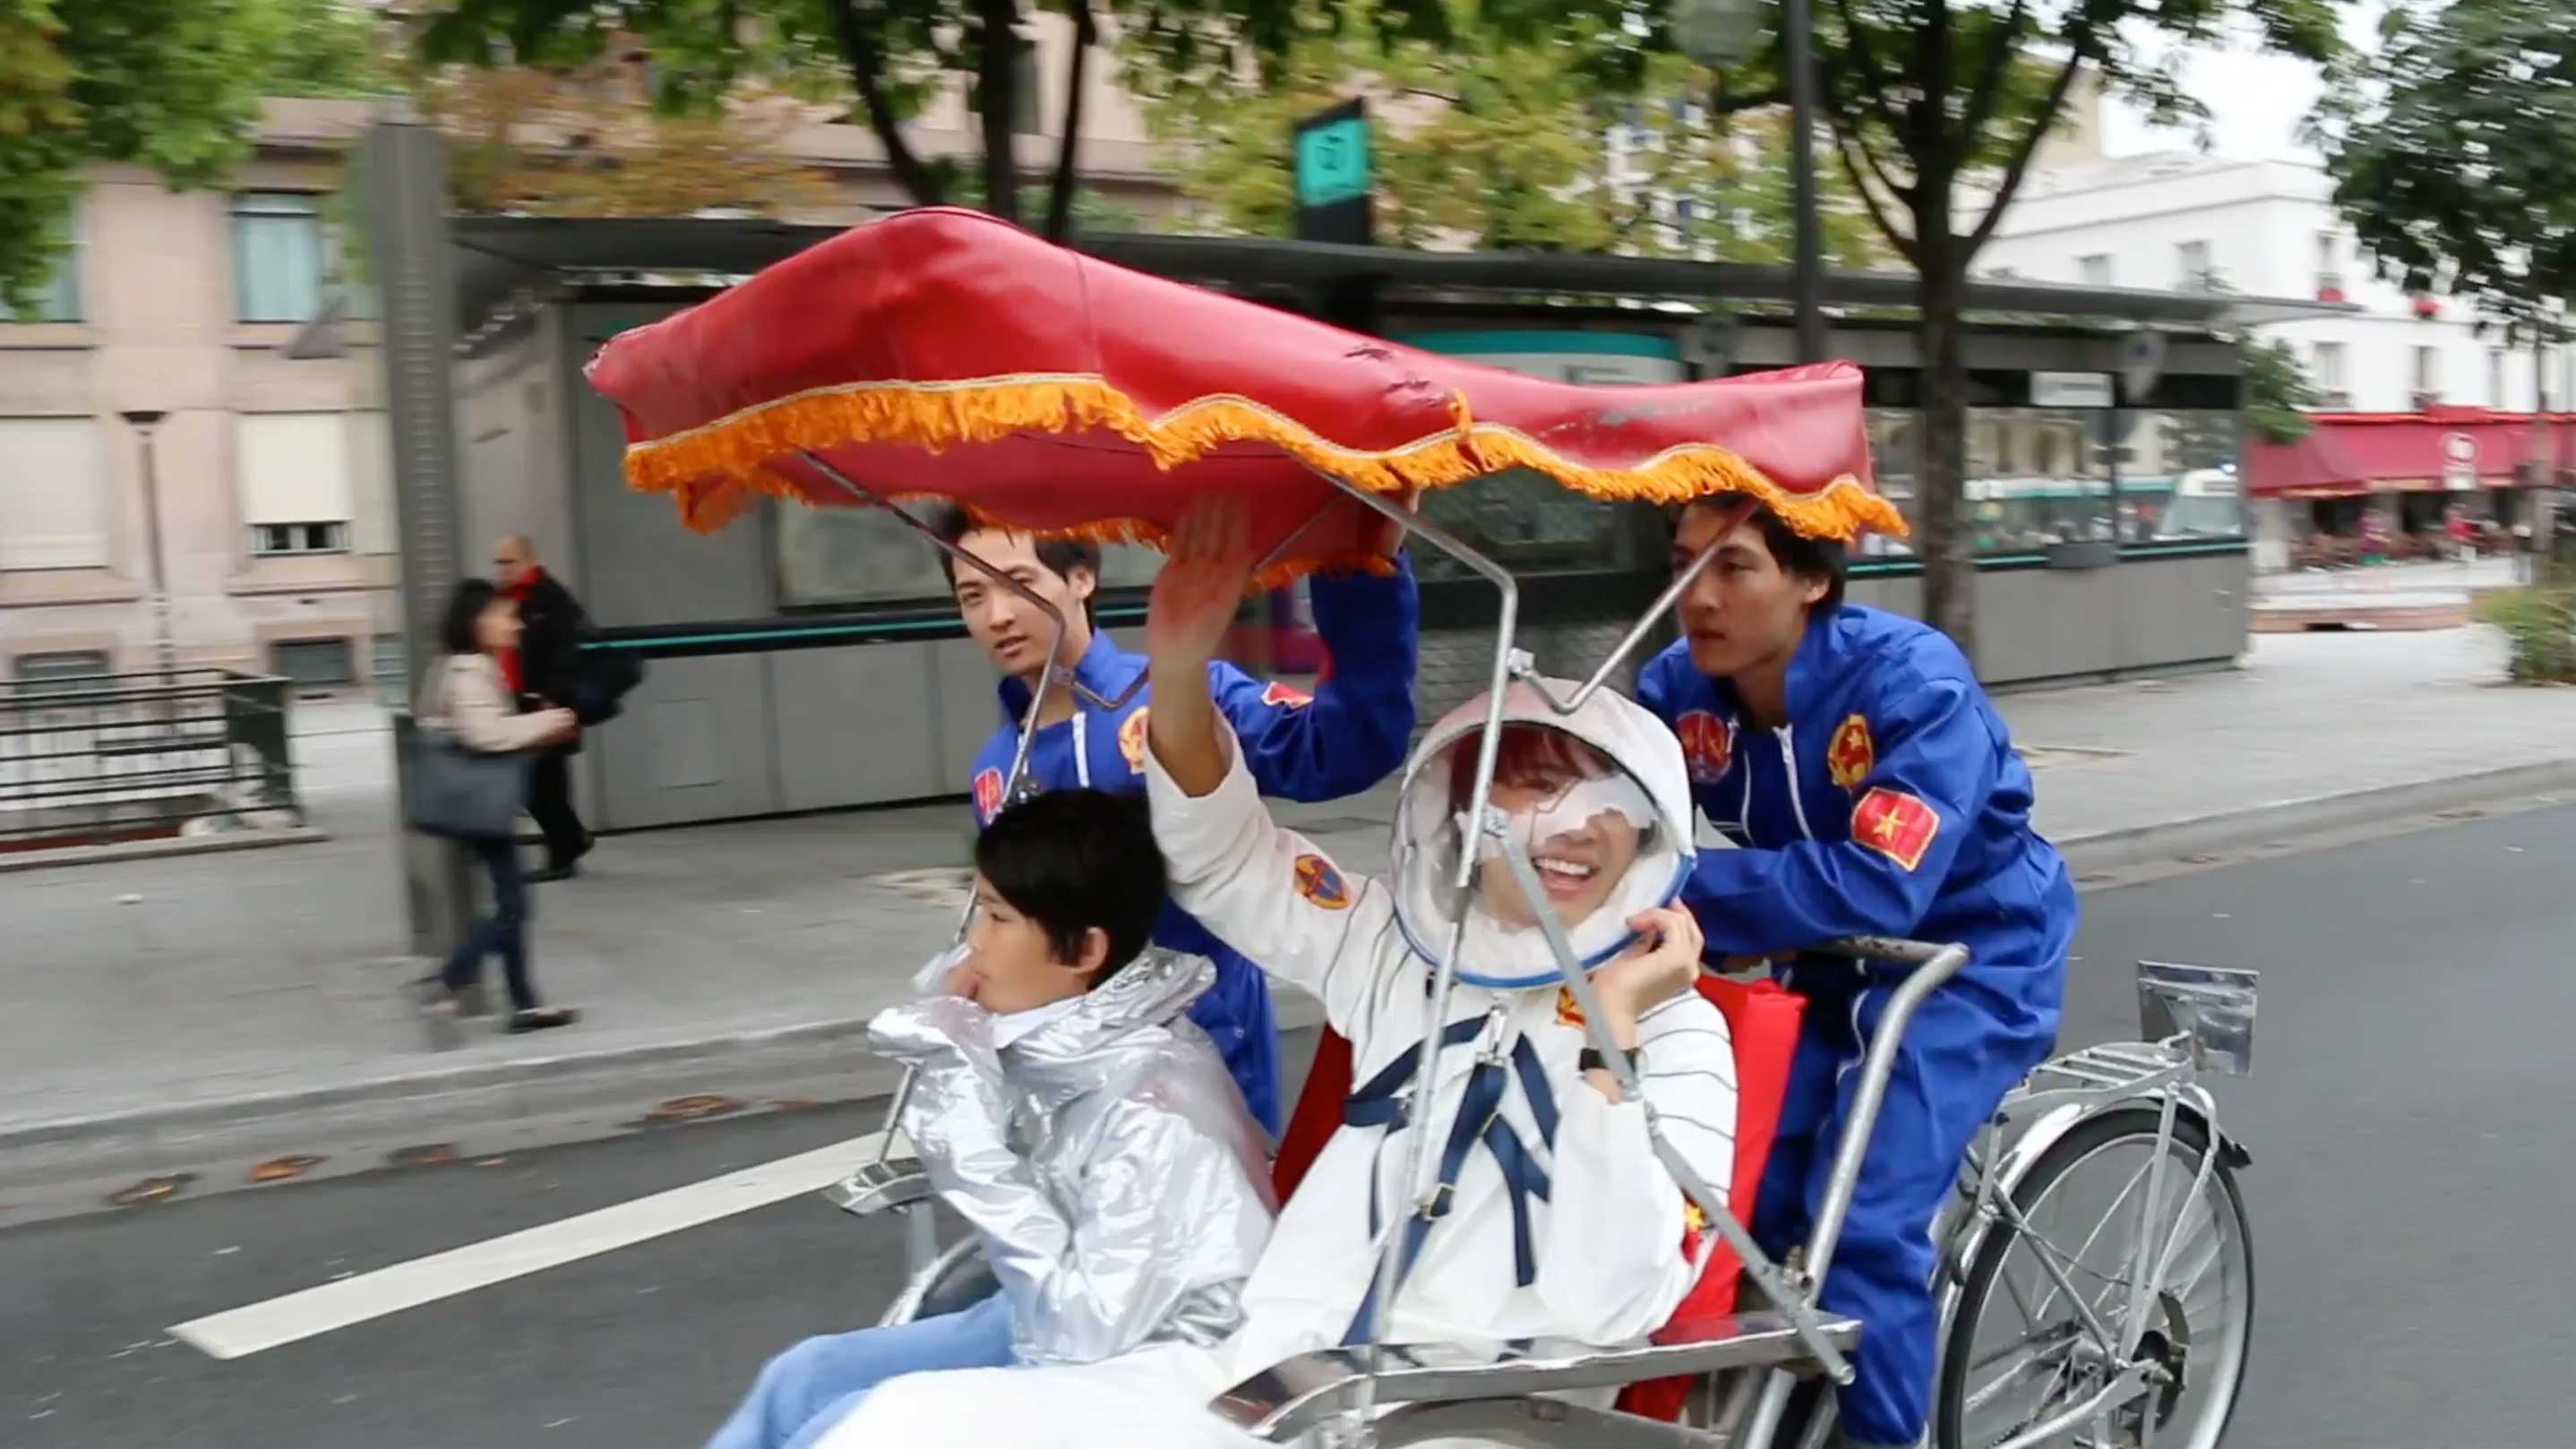 Four people are riding a cyclo through a street. Two who wear blue uniforms are sitting in the back, presumably steering the cyclo, while two who wear a silver space suit and a white astronaut uniform with a helmet sit in the front. The person in the astronaut uniform is laughing and waving.